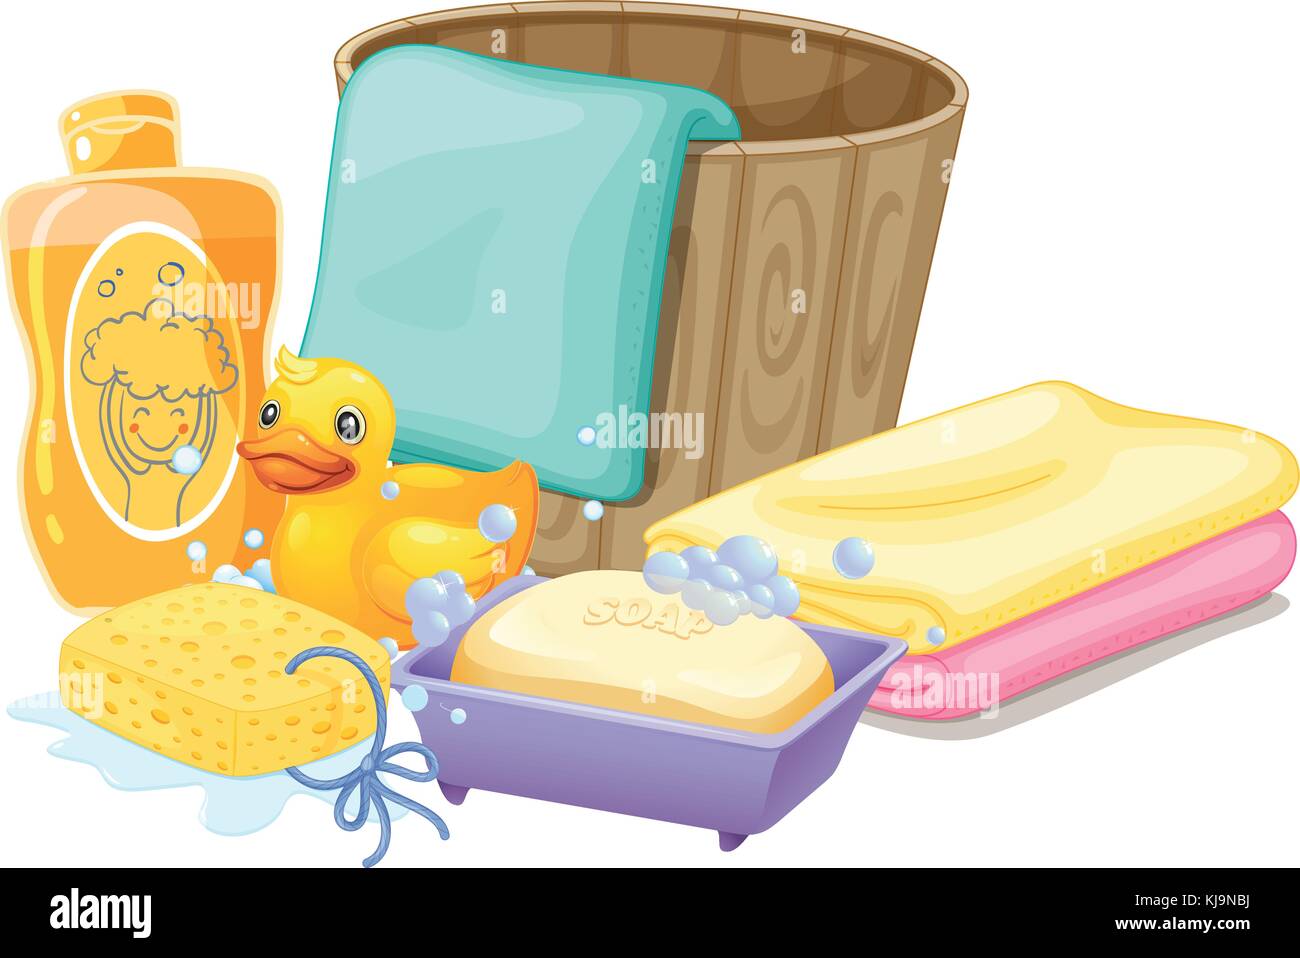 Illustration of the things needed in taking a bath Stock Vector